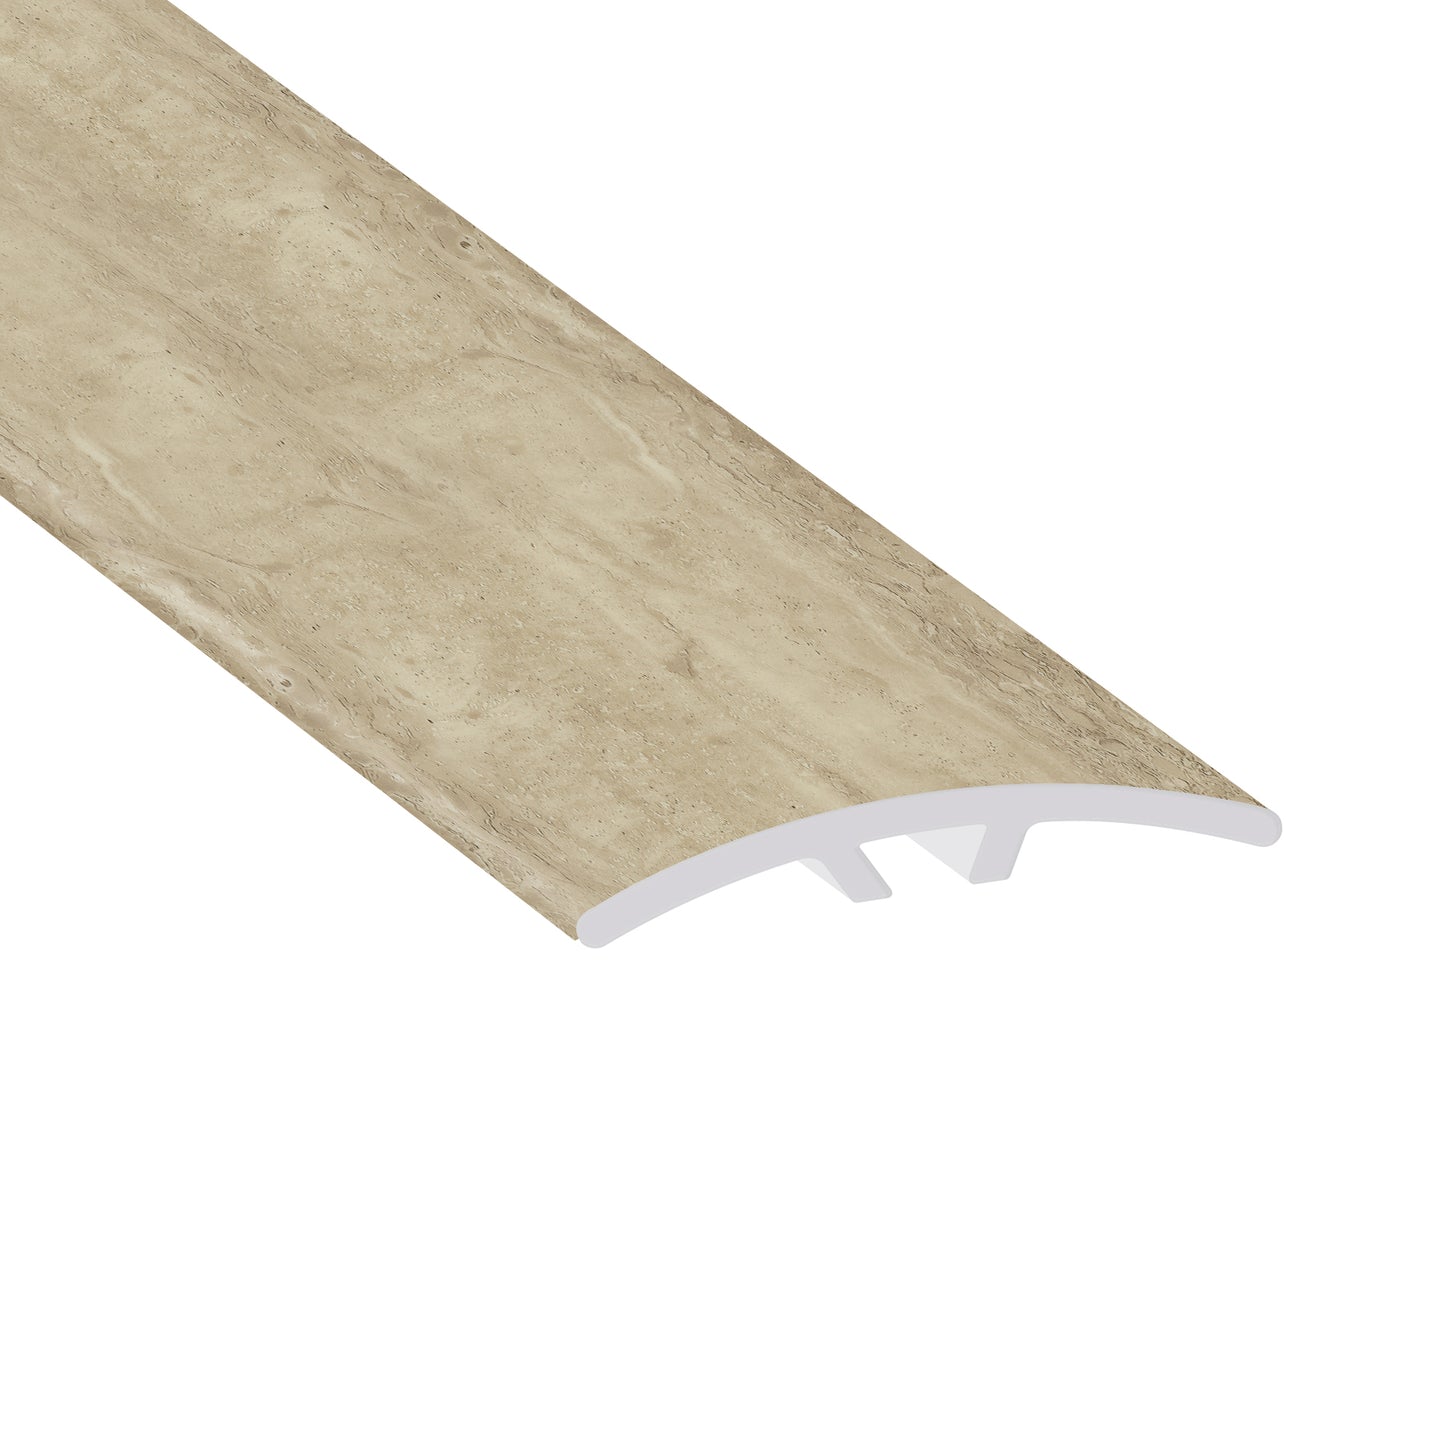 Torcello Travertine 0.23 in. Thich x 1.59 in. Width x 94 in. Length Multi-Purpose Reducer Vinyl Molding